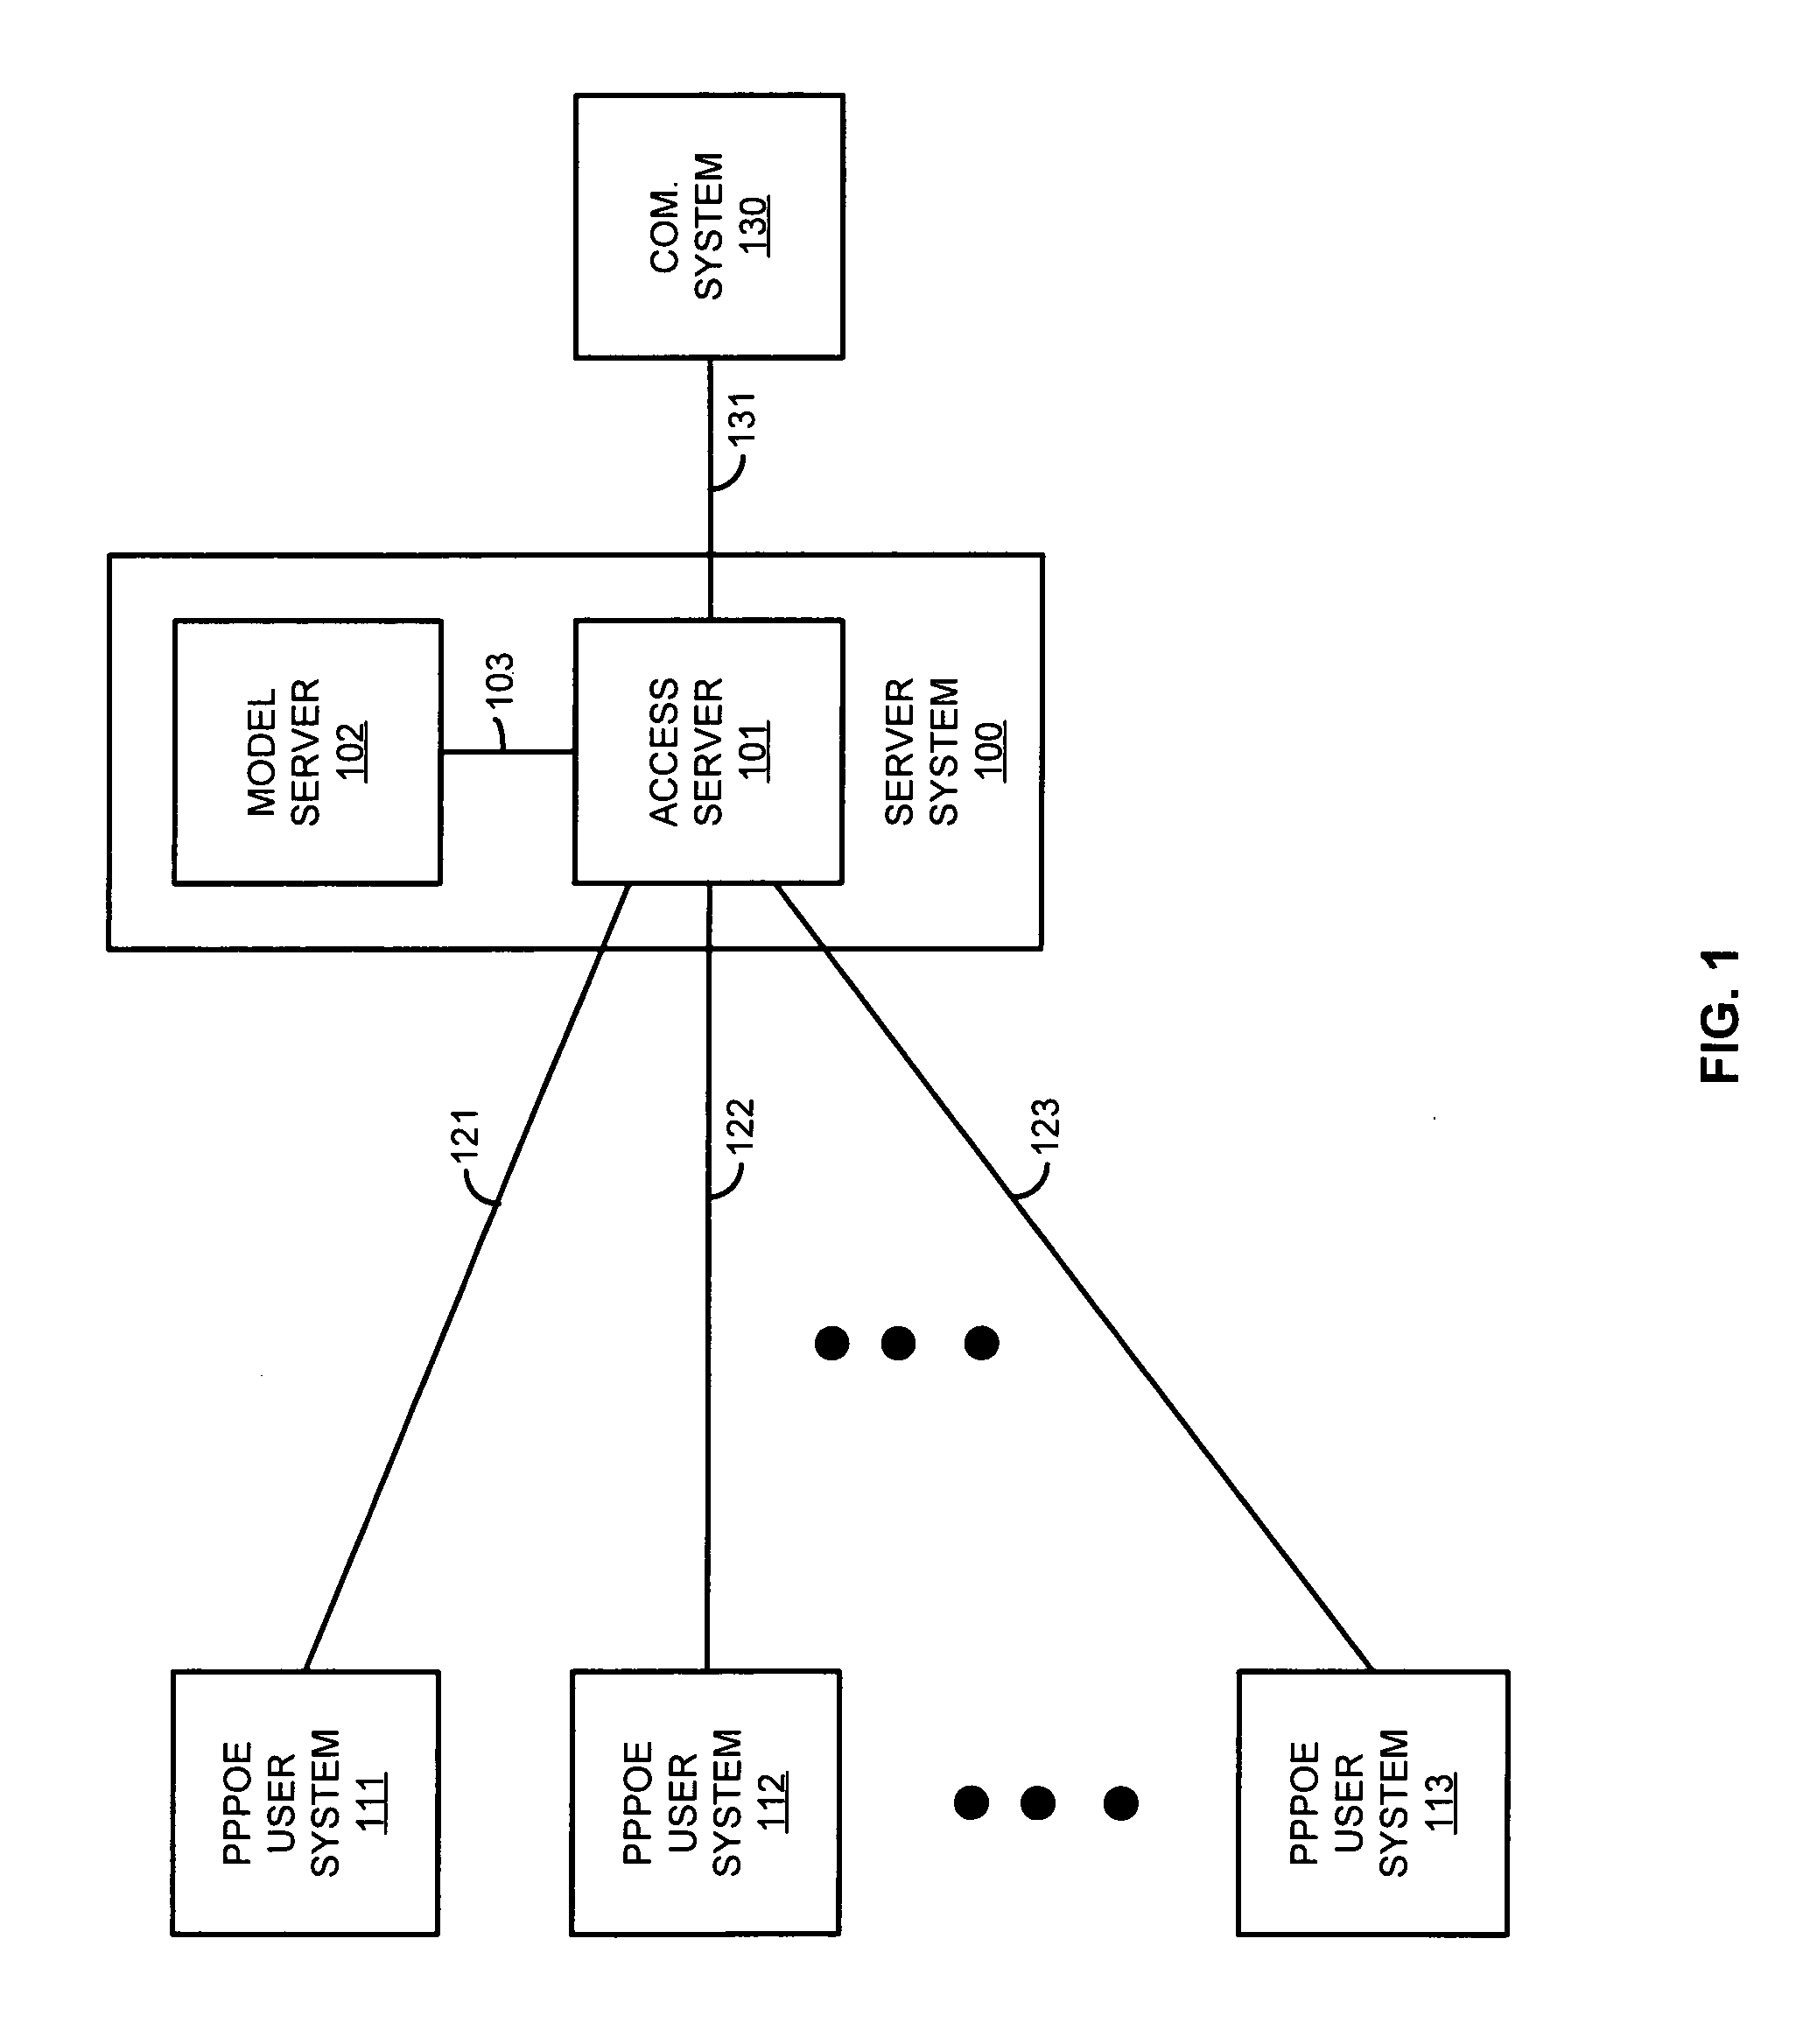 Session admission control for communication systems that use point-to-point protocol over ethernet